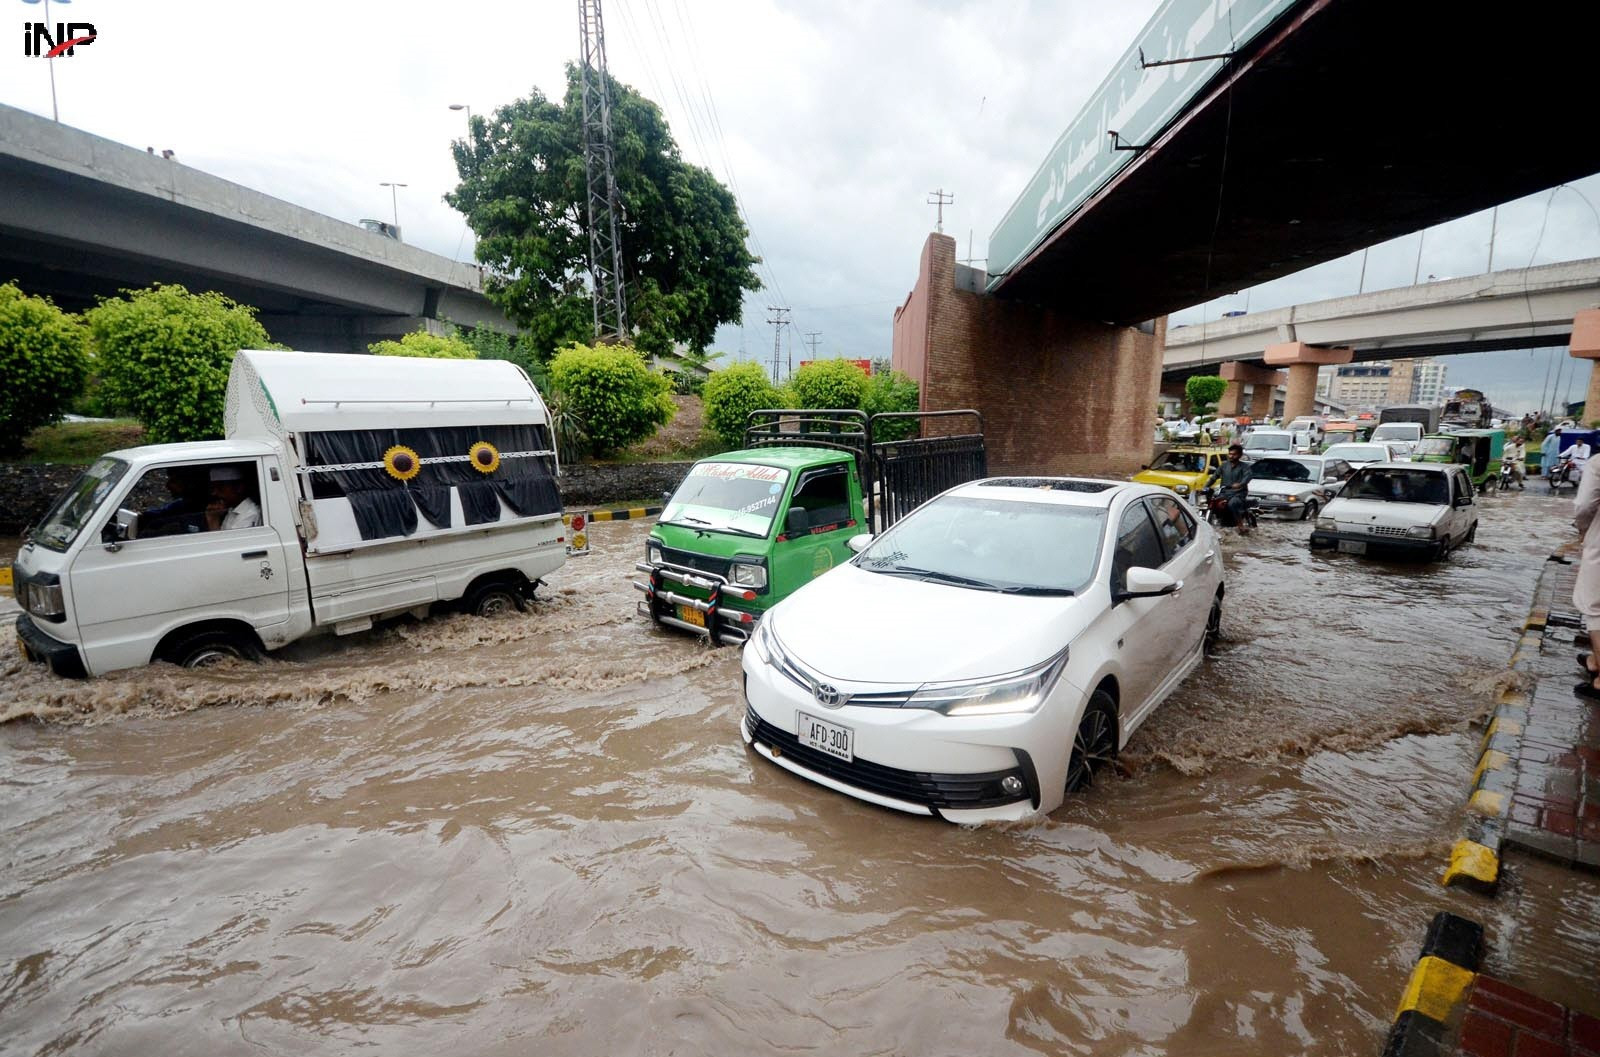 vehicles are inundated in rainwater as showers hit various parts of peshawar photo inp